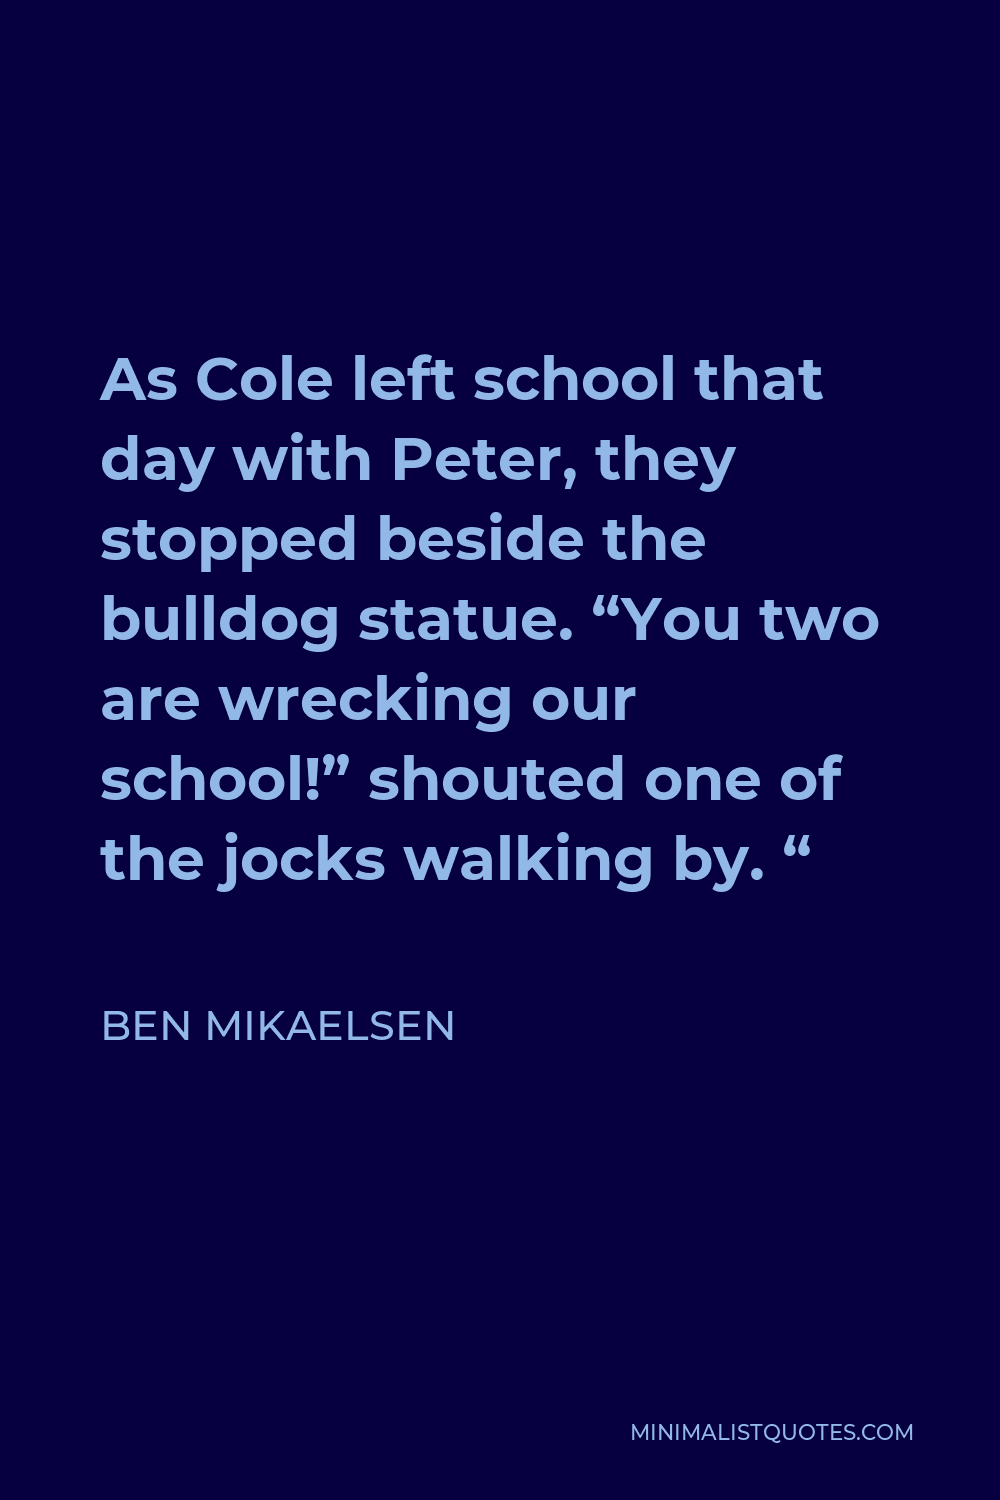 Ben Mikaelsen Quote - As Cole left school that day with Peter, they stopped beside the bulldog statue. “You two are wrecking our school!” shouted one of the jocks walking by. “